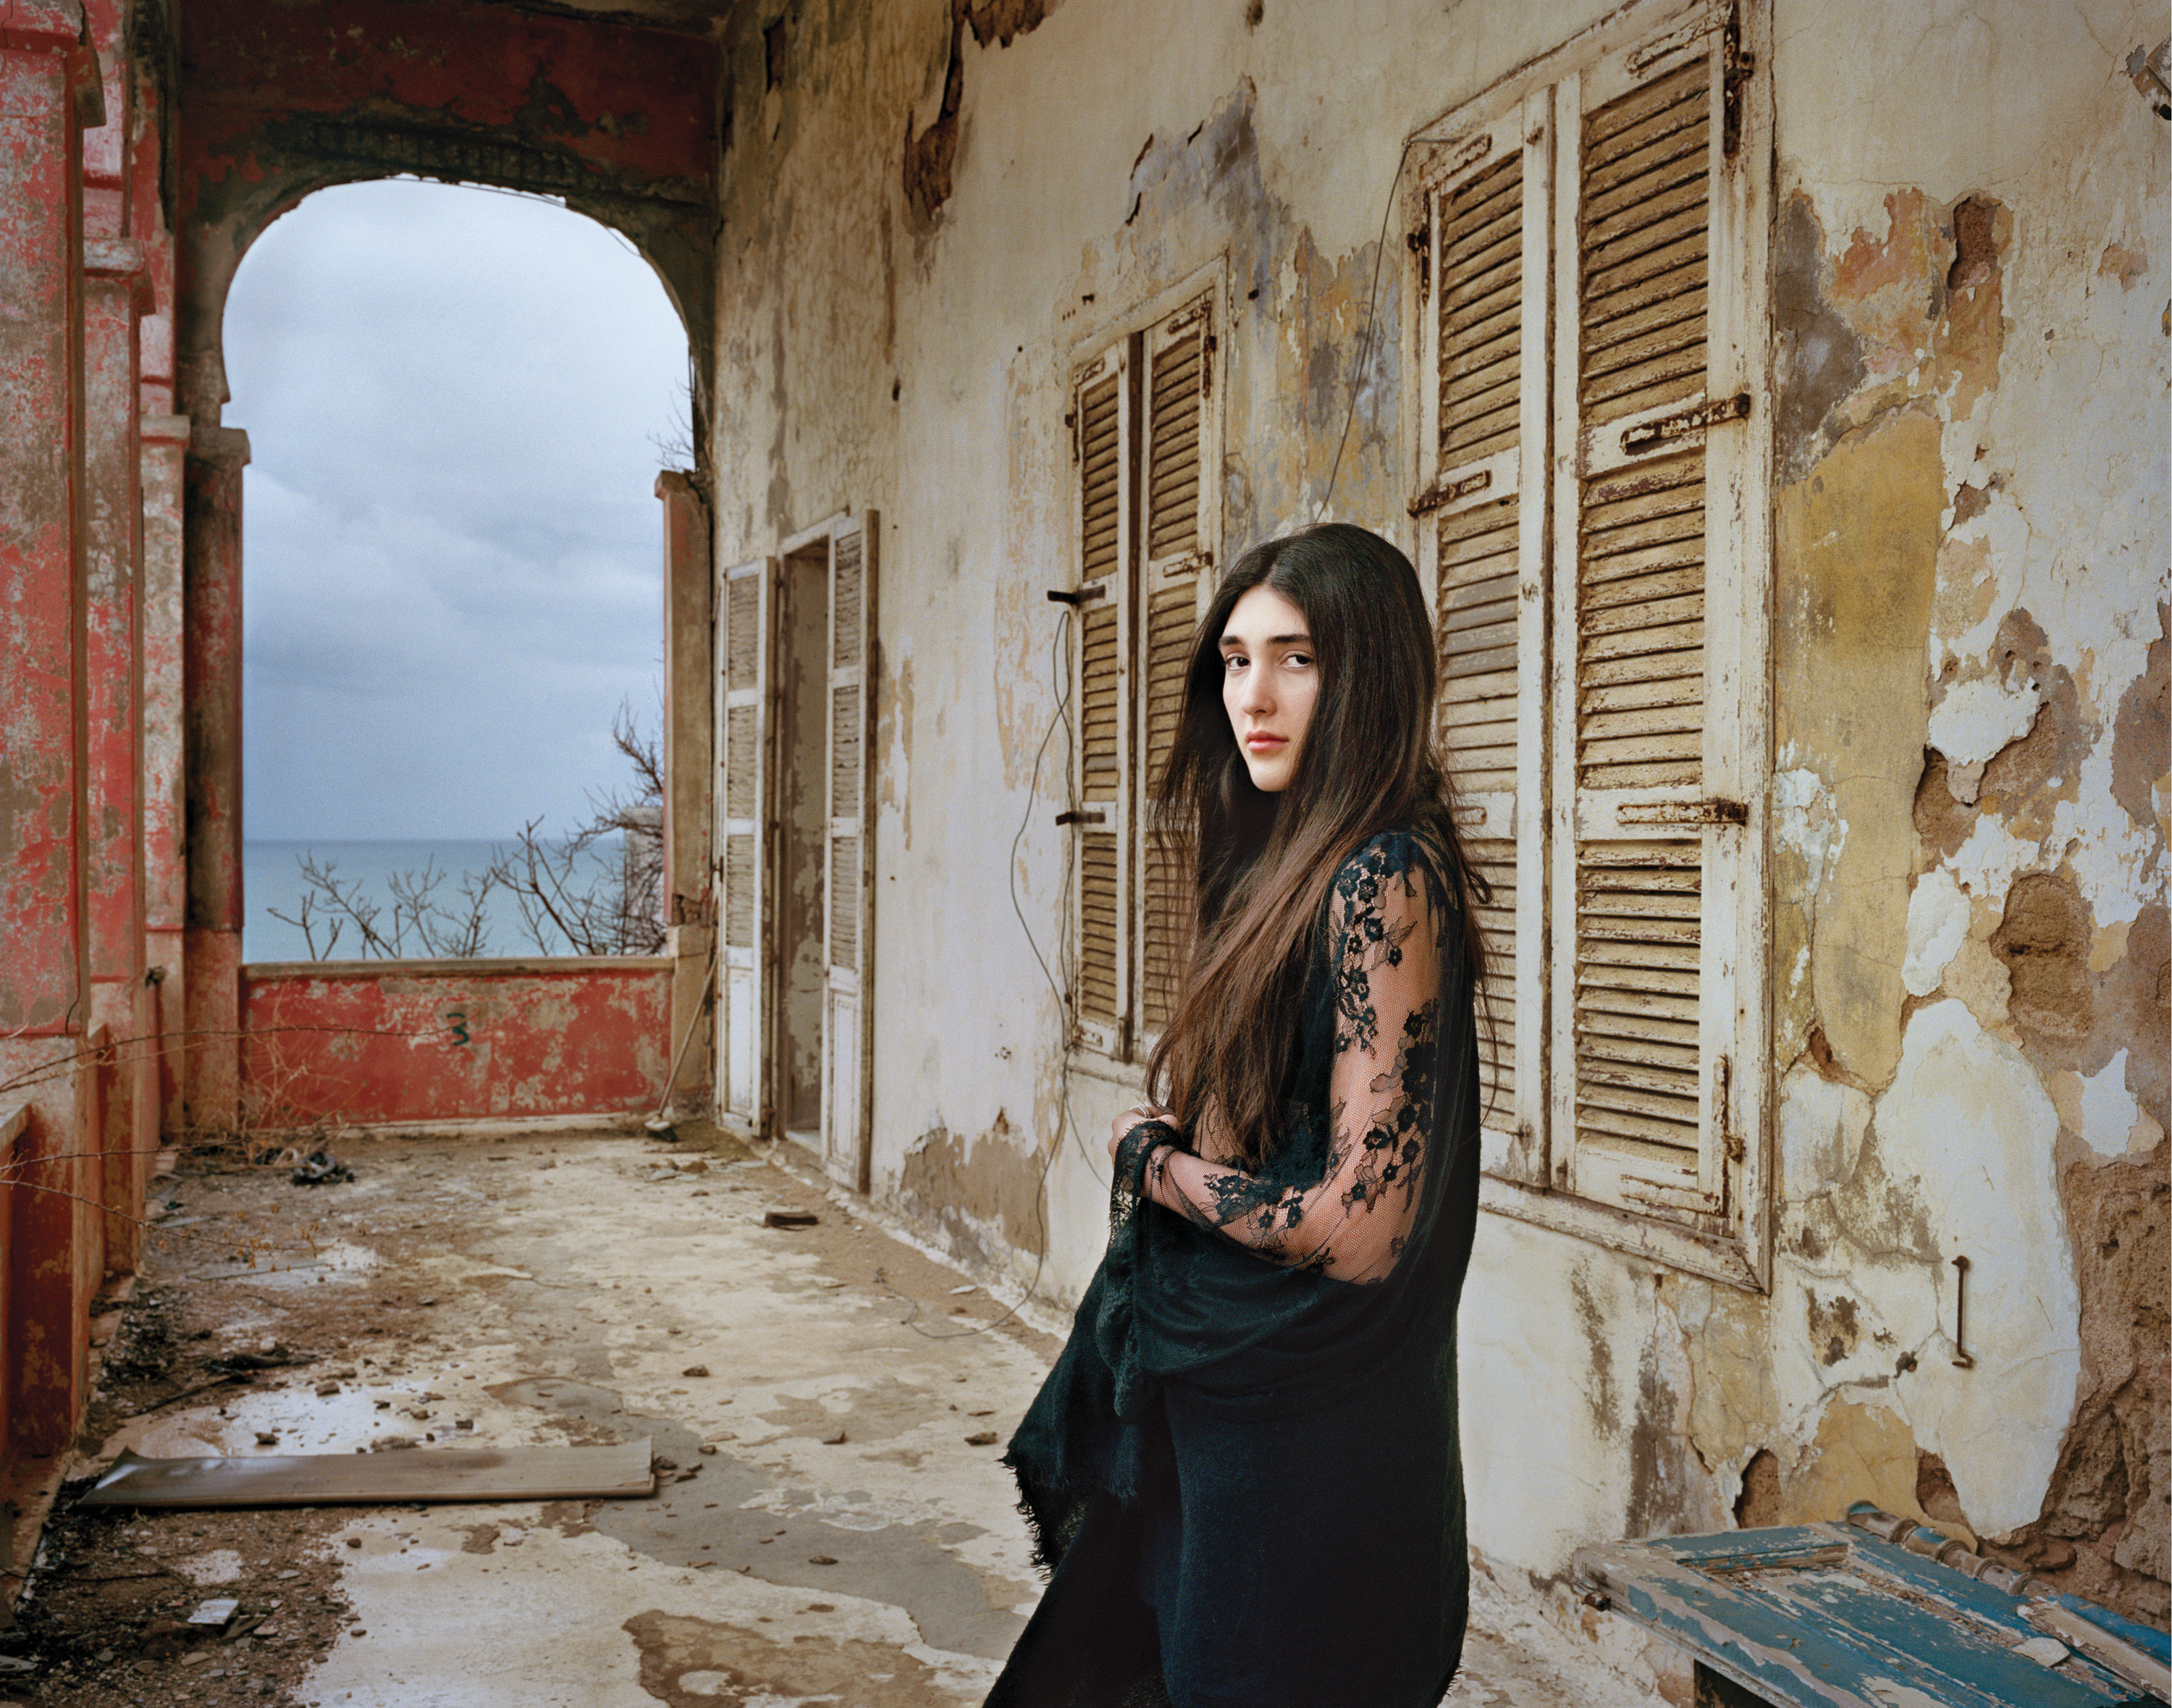 Rania Matar Finds Inspiration in the Amazing Women She Photographs